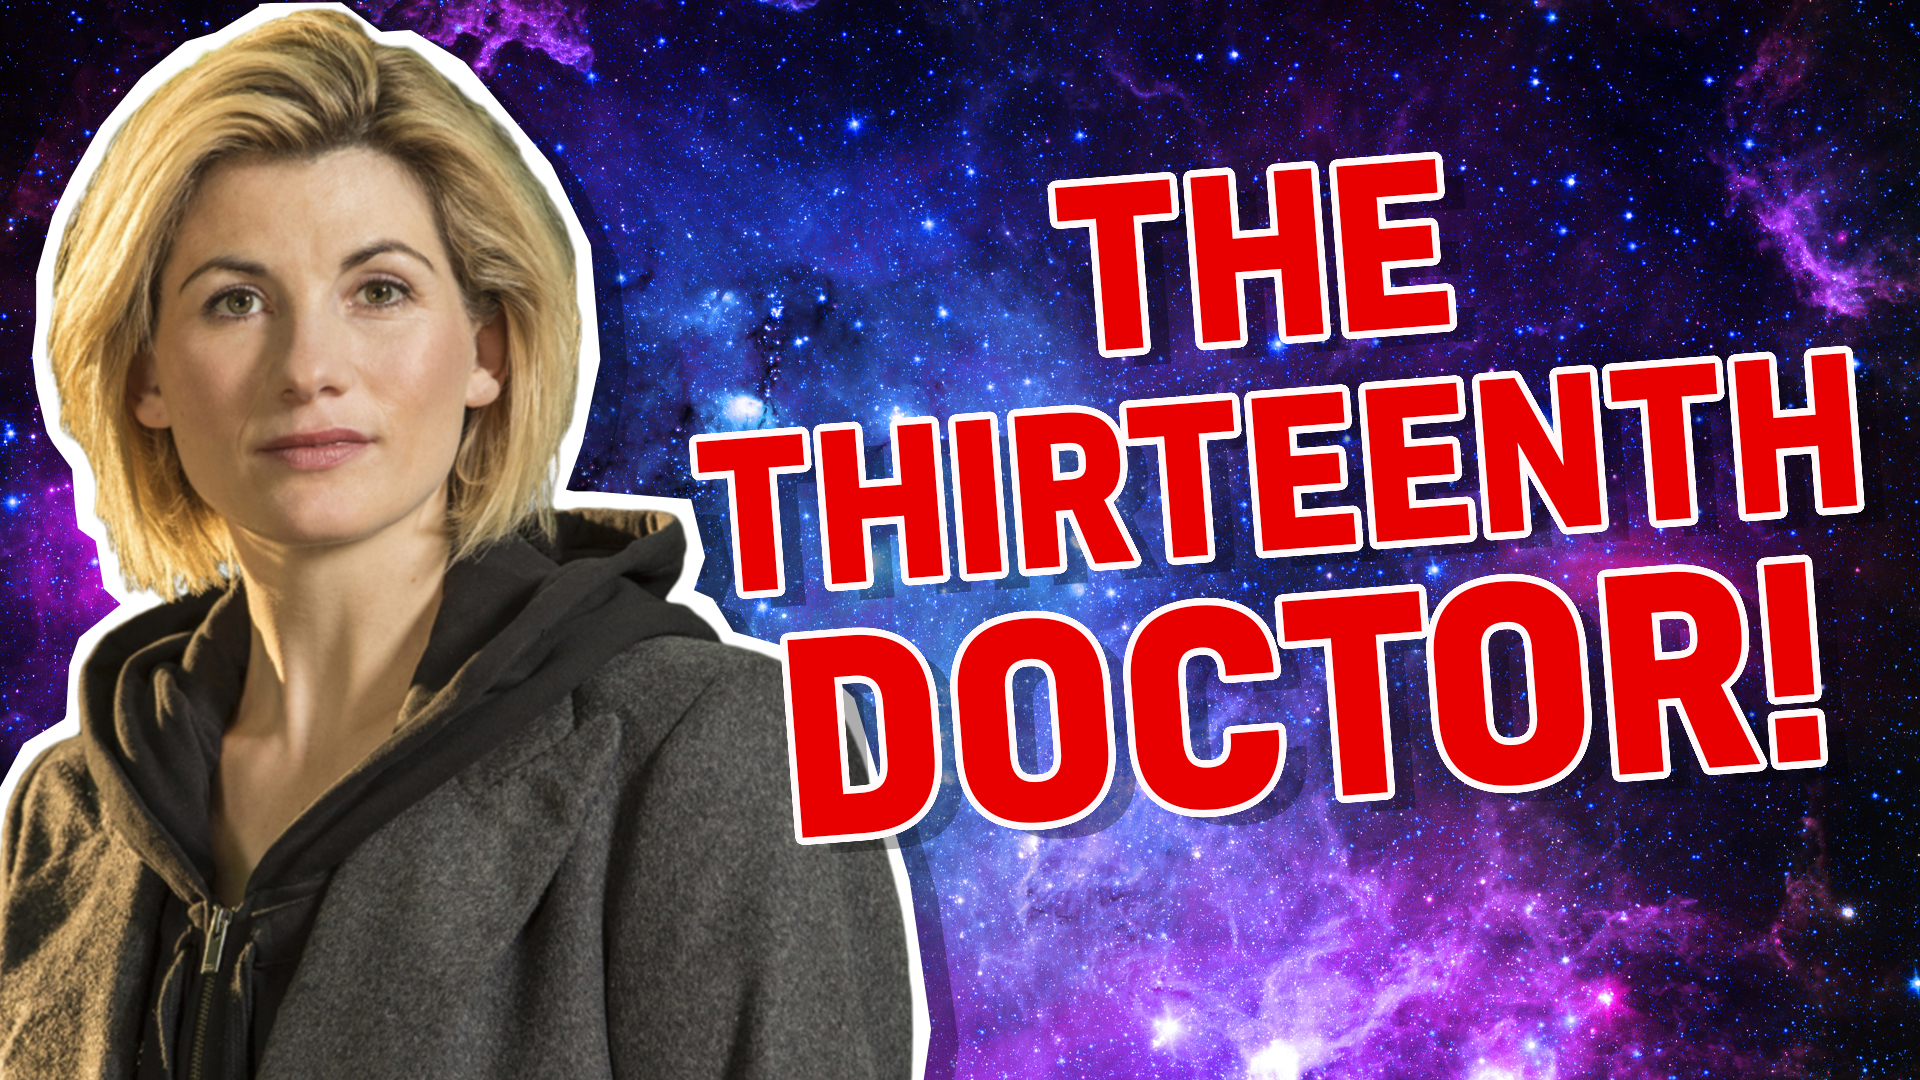 The thirteenth Doctor Who